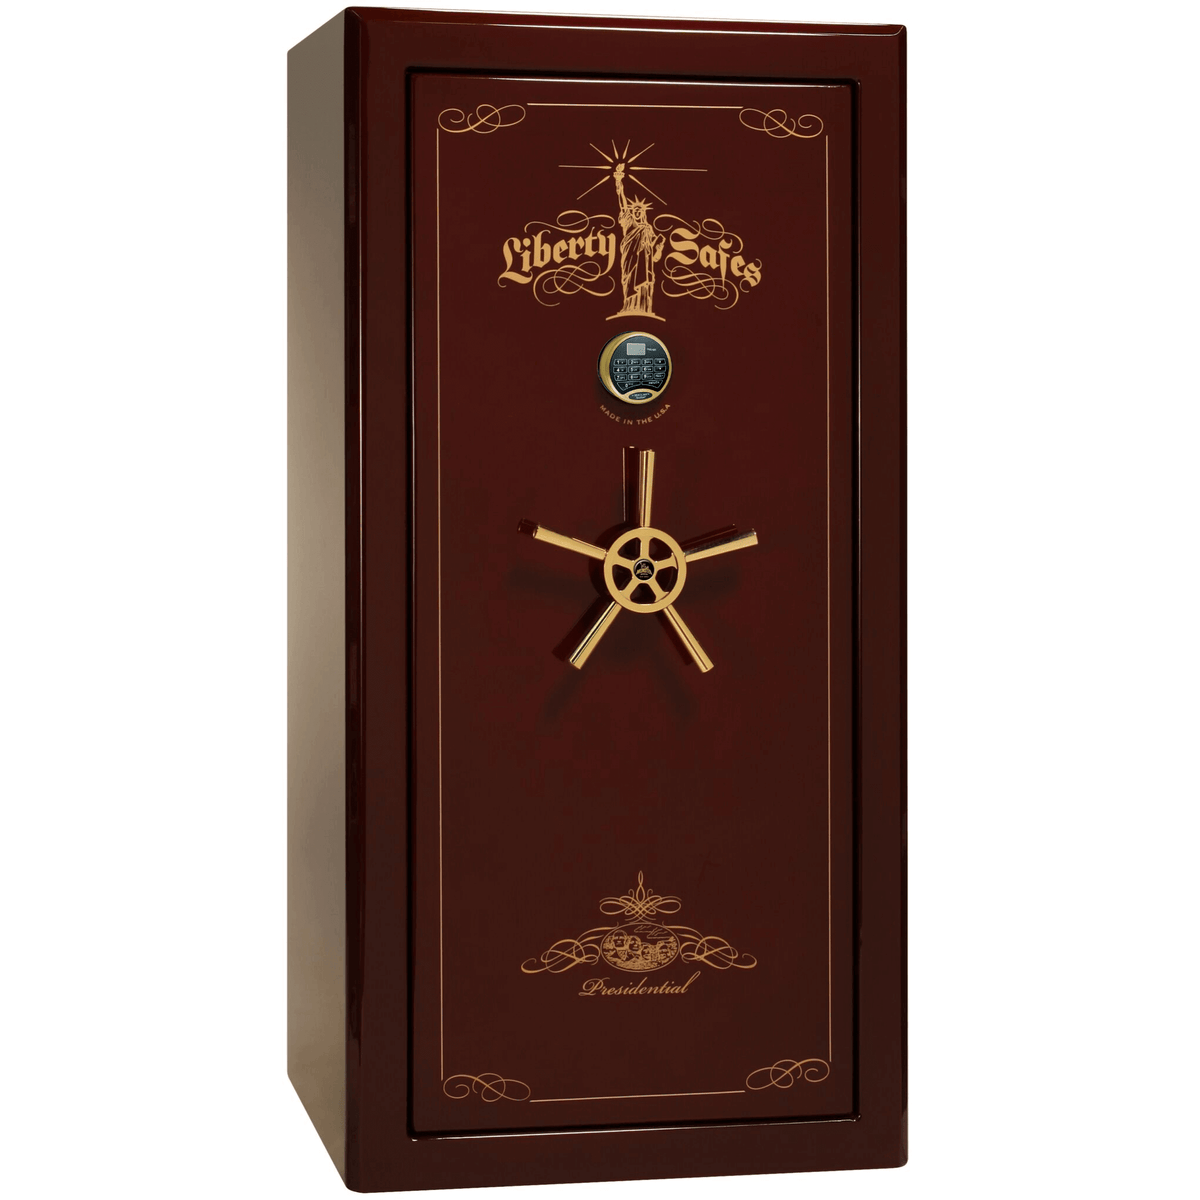 Liberty Safe Presidential 25 in Burgundy Gloss with 24k Gold Electronic Lock, closed door.